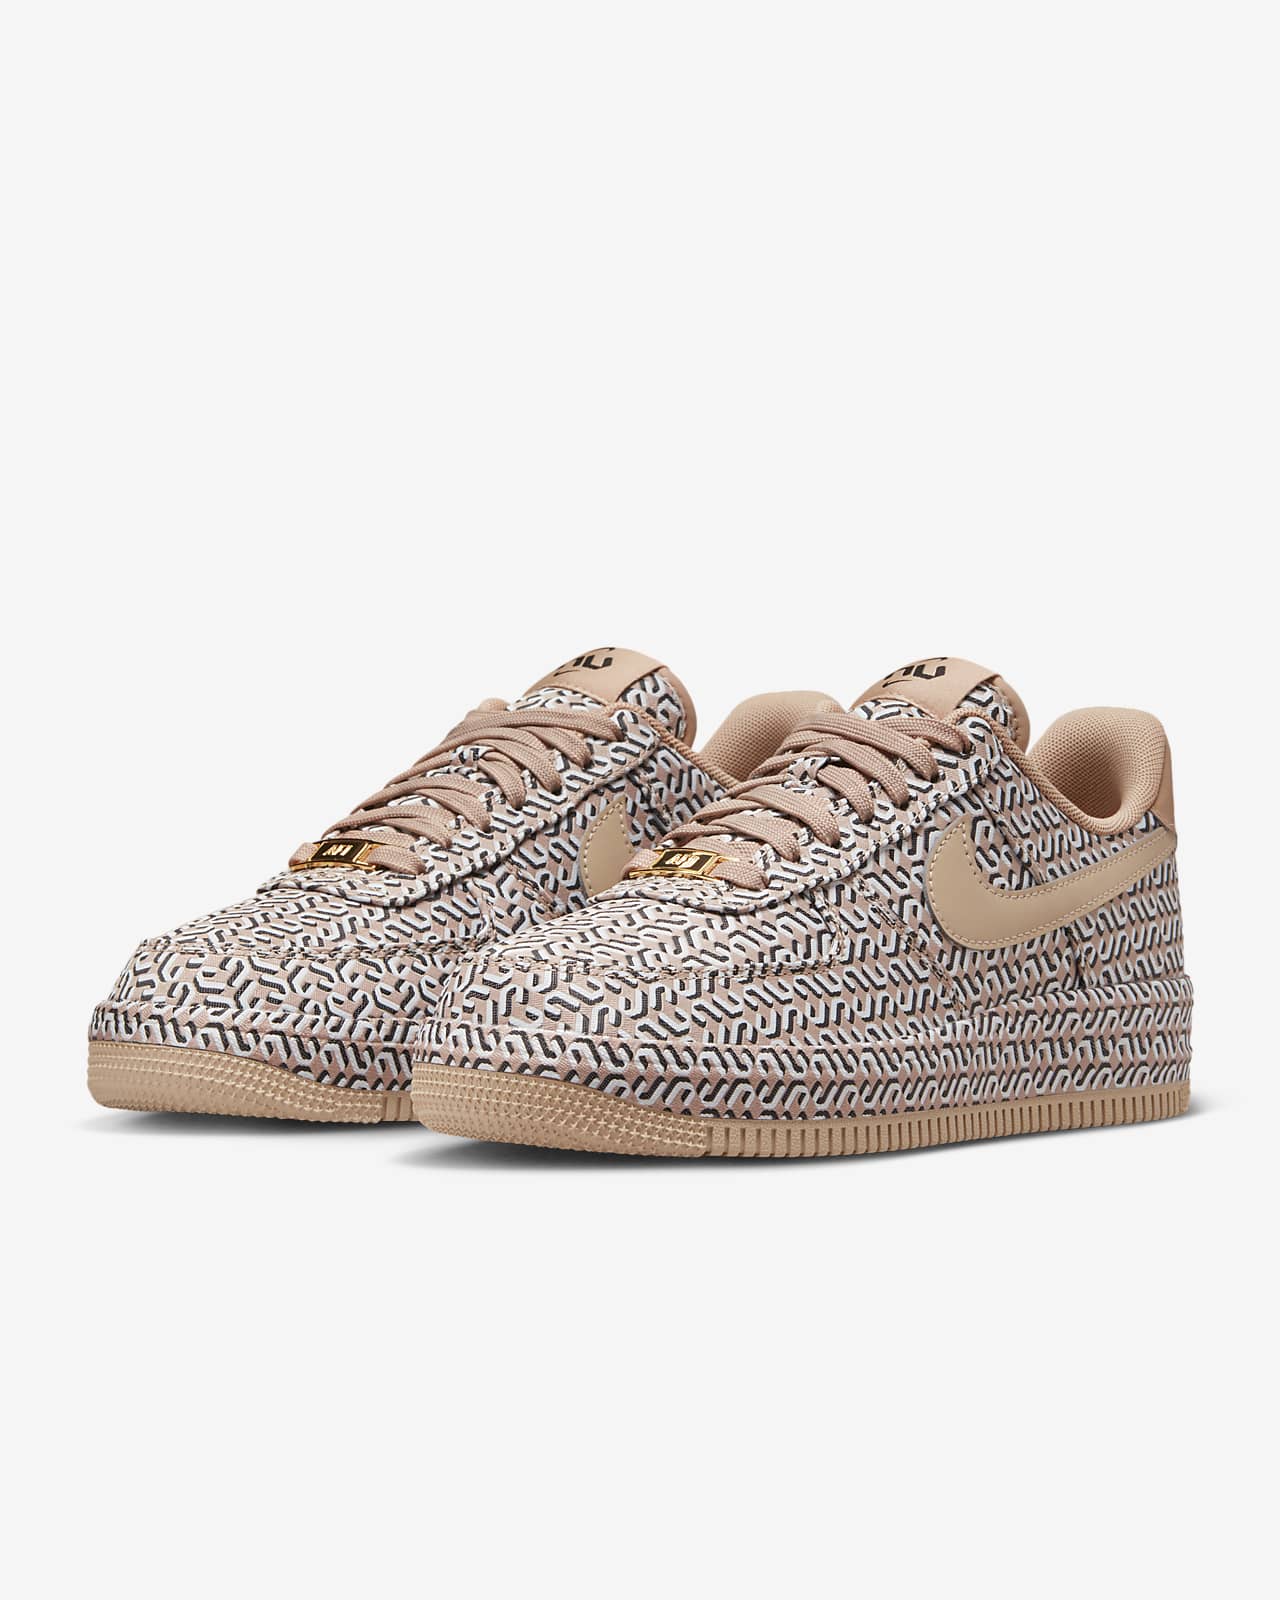 Nike Air Force 1 '07 Mid LX Women's Shoes